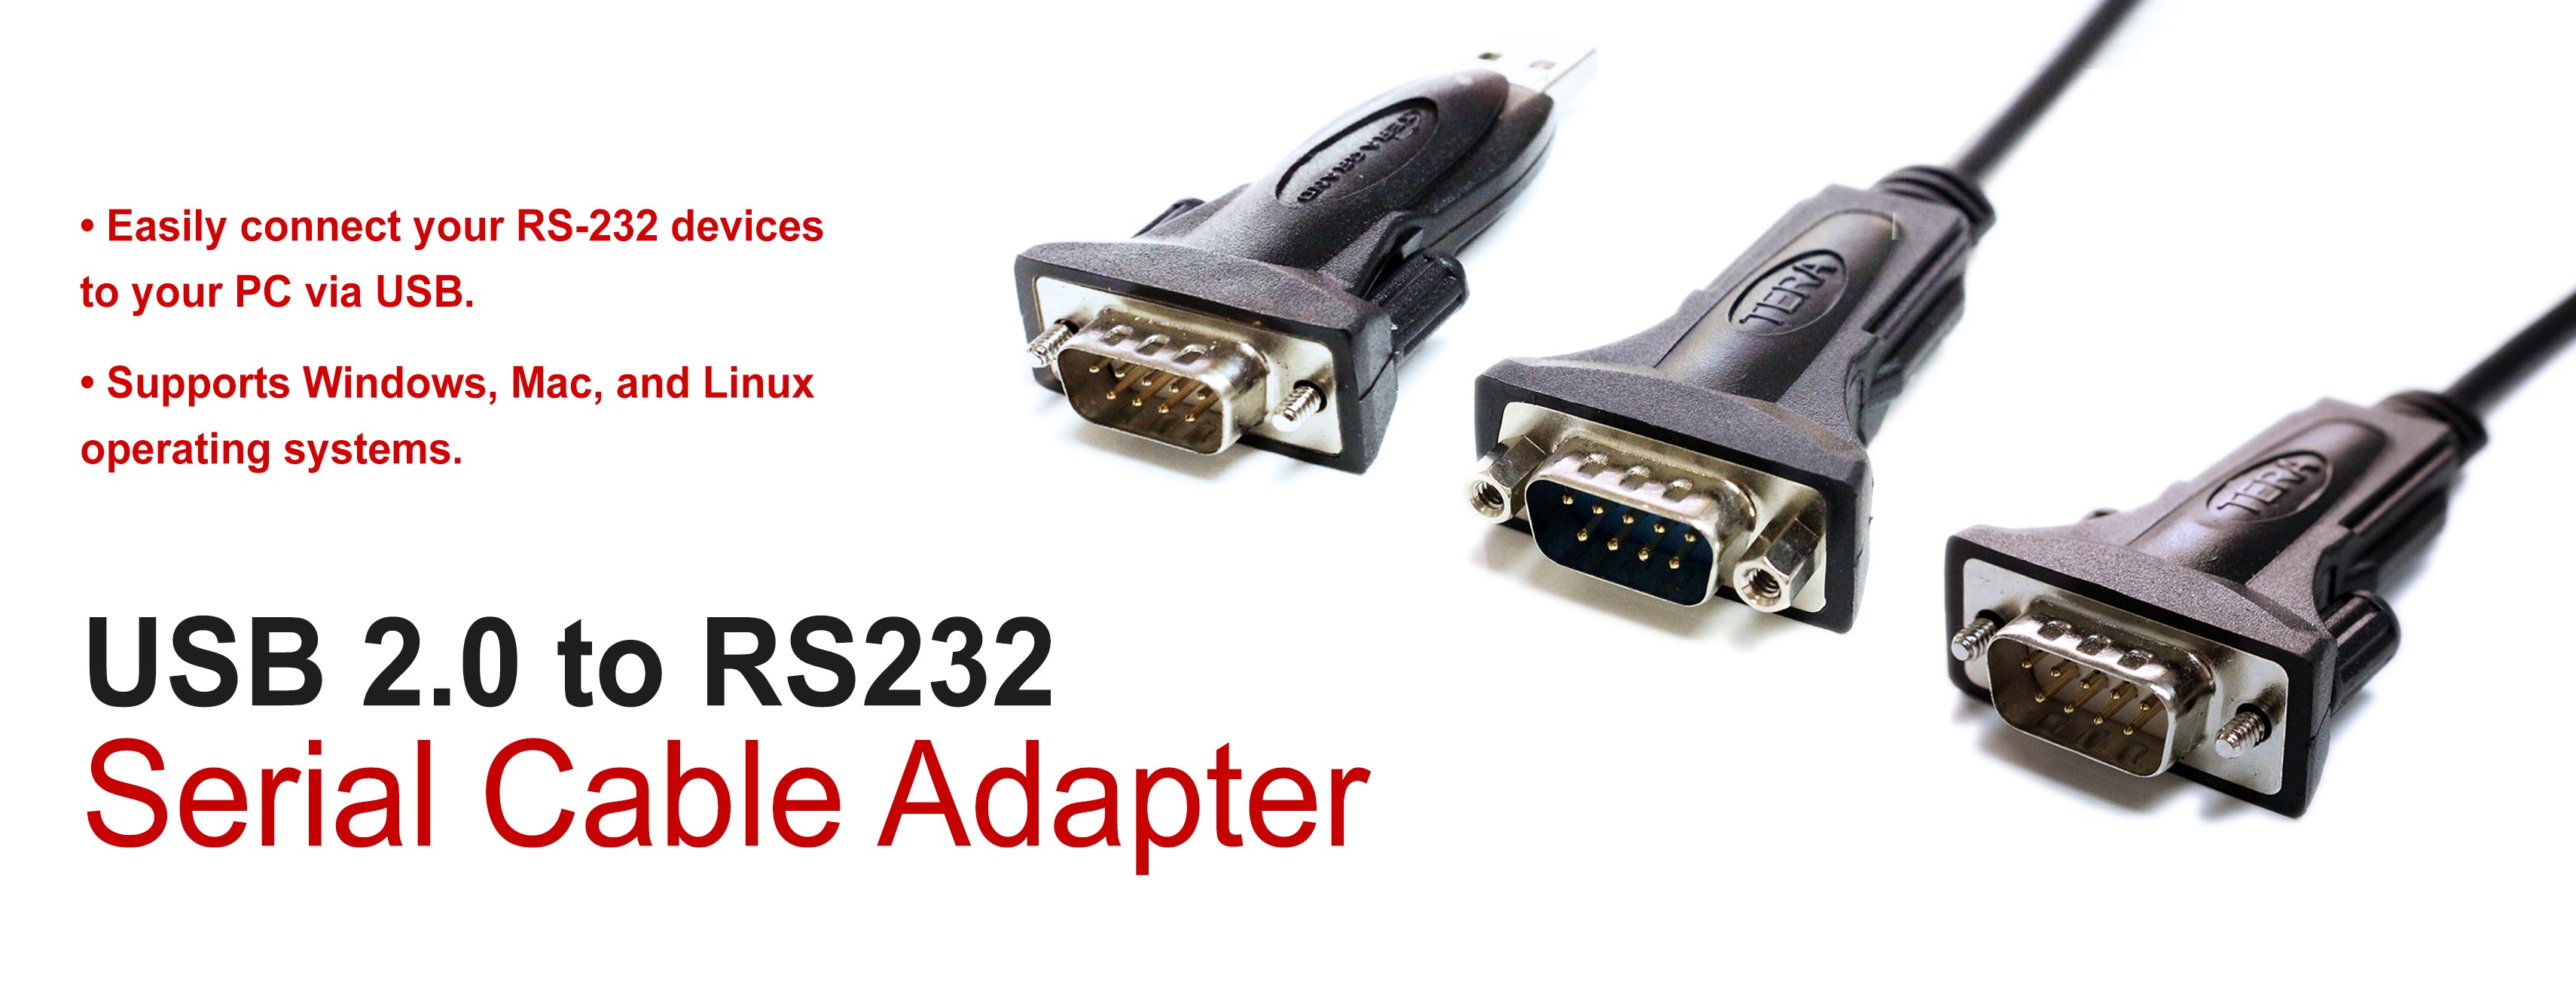 USB USB-A to RS232 Serial Adapter Cables Tera Grand